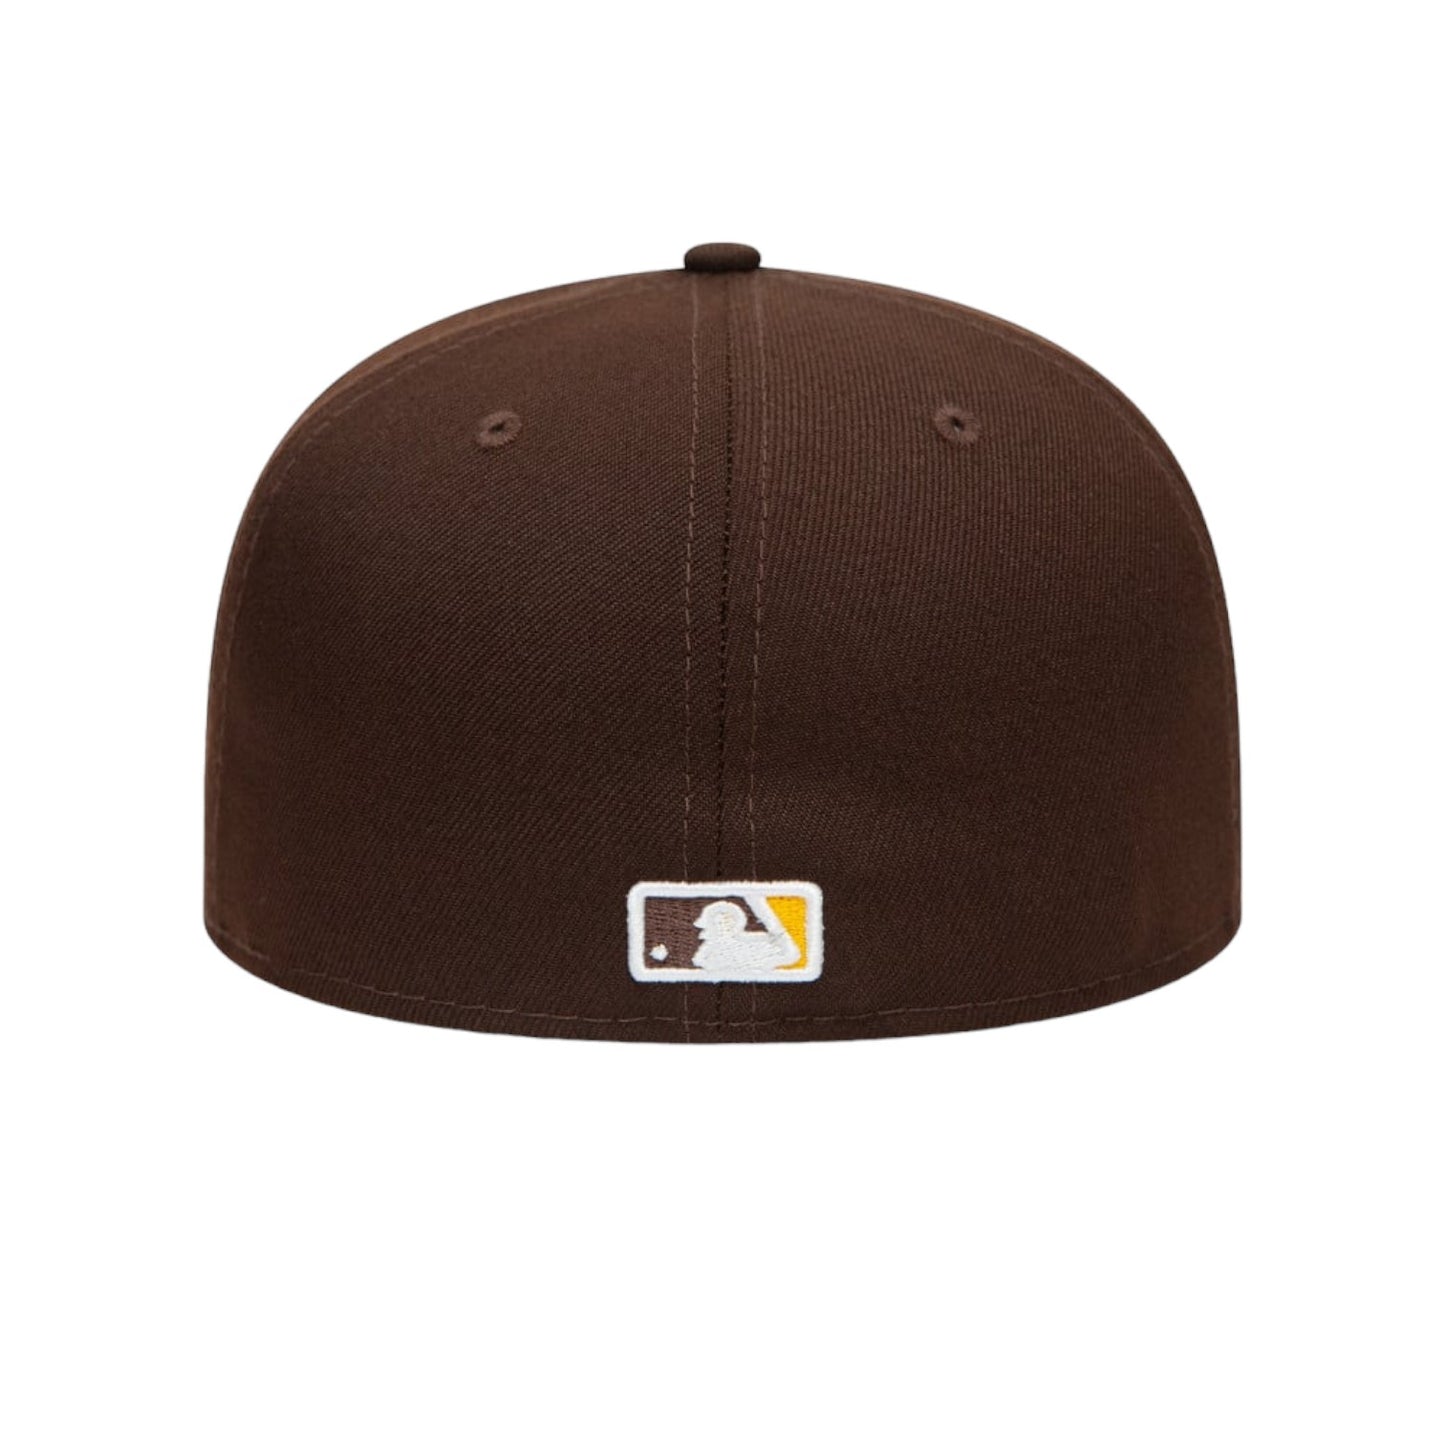 59FIFTY Fitted San Diego Padres Authentic On Field